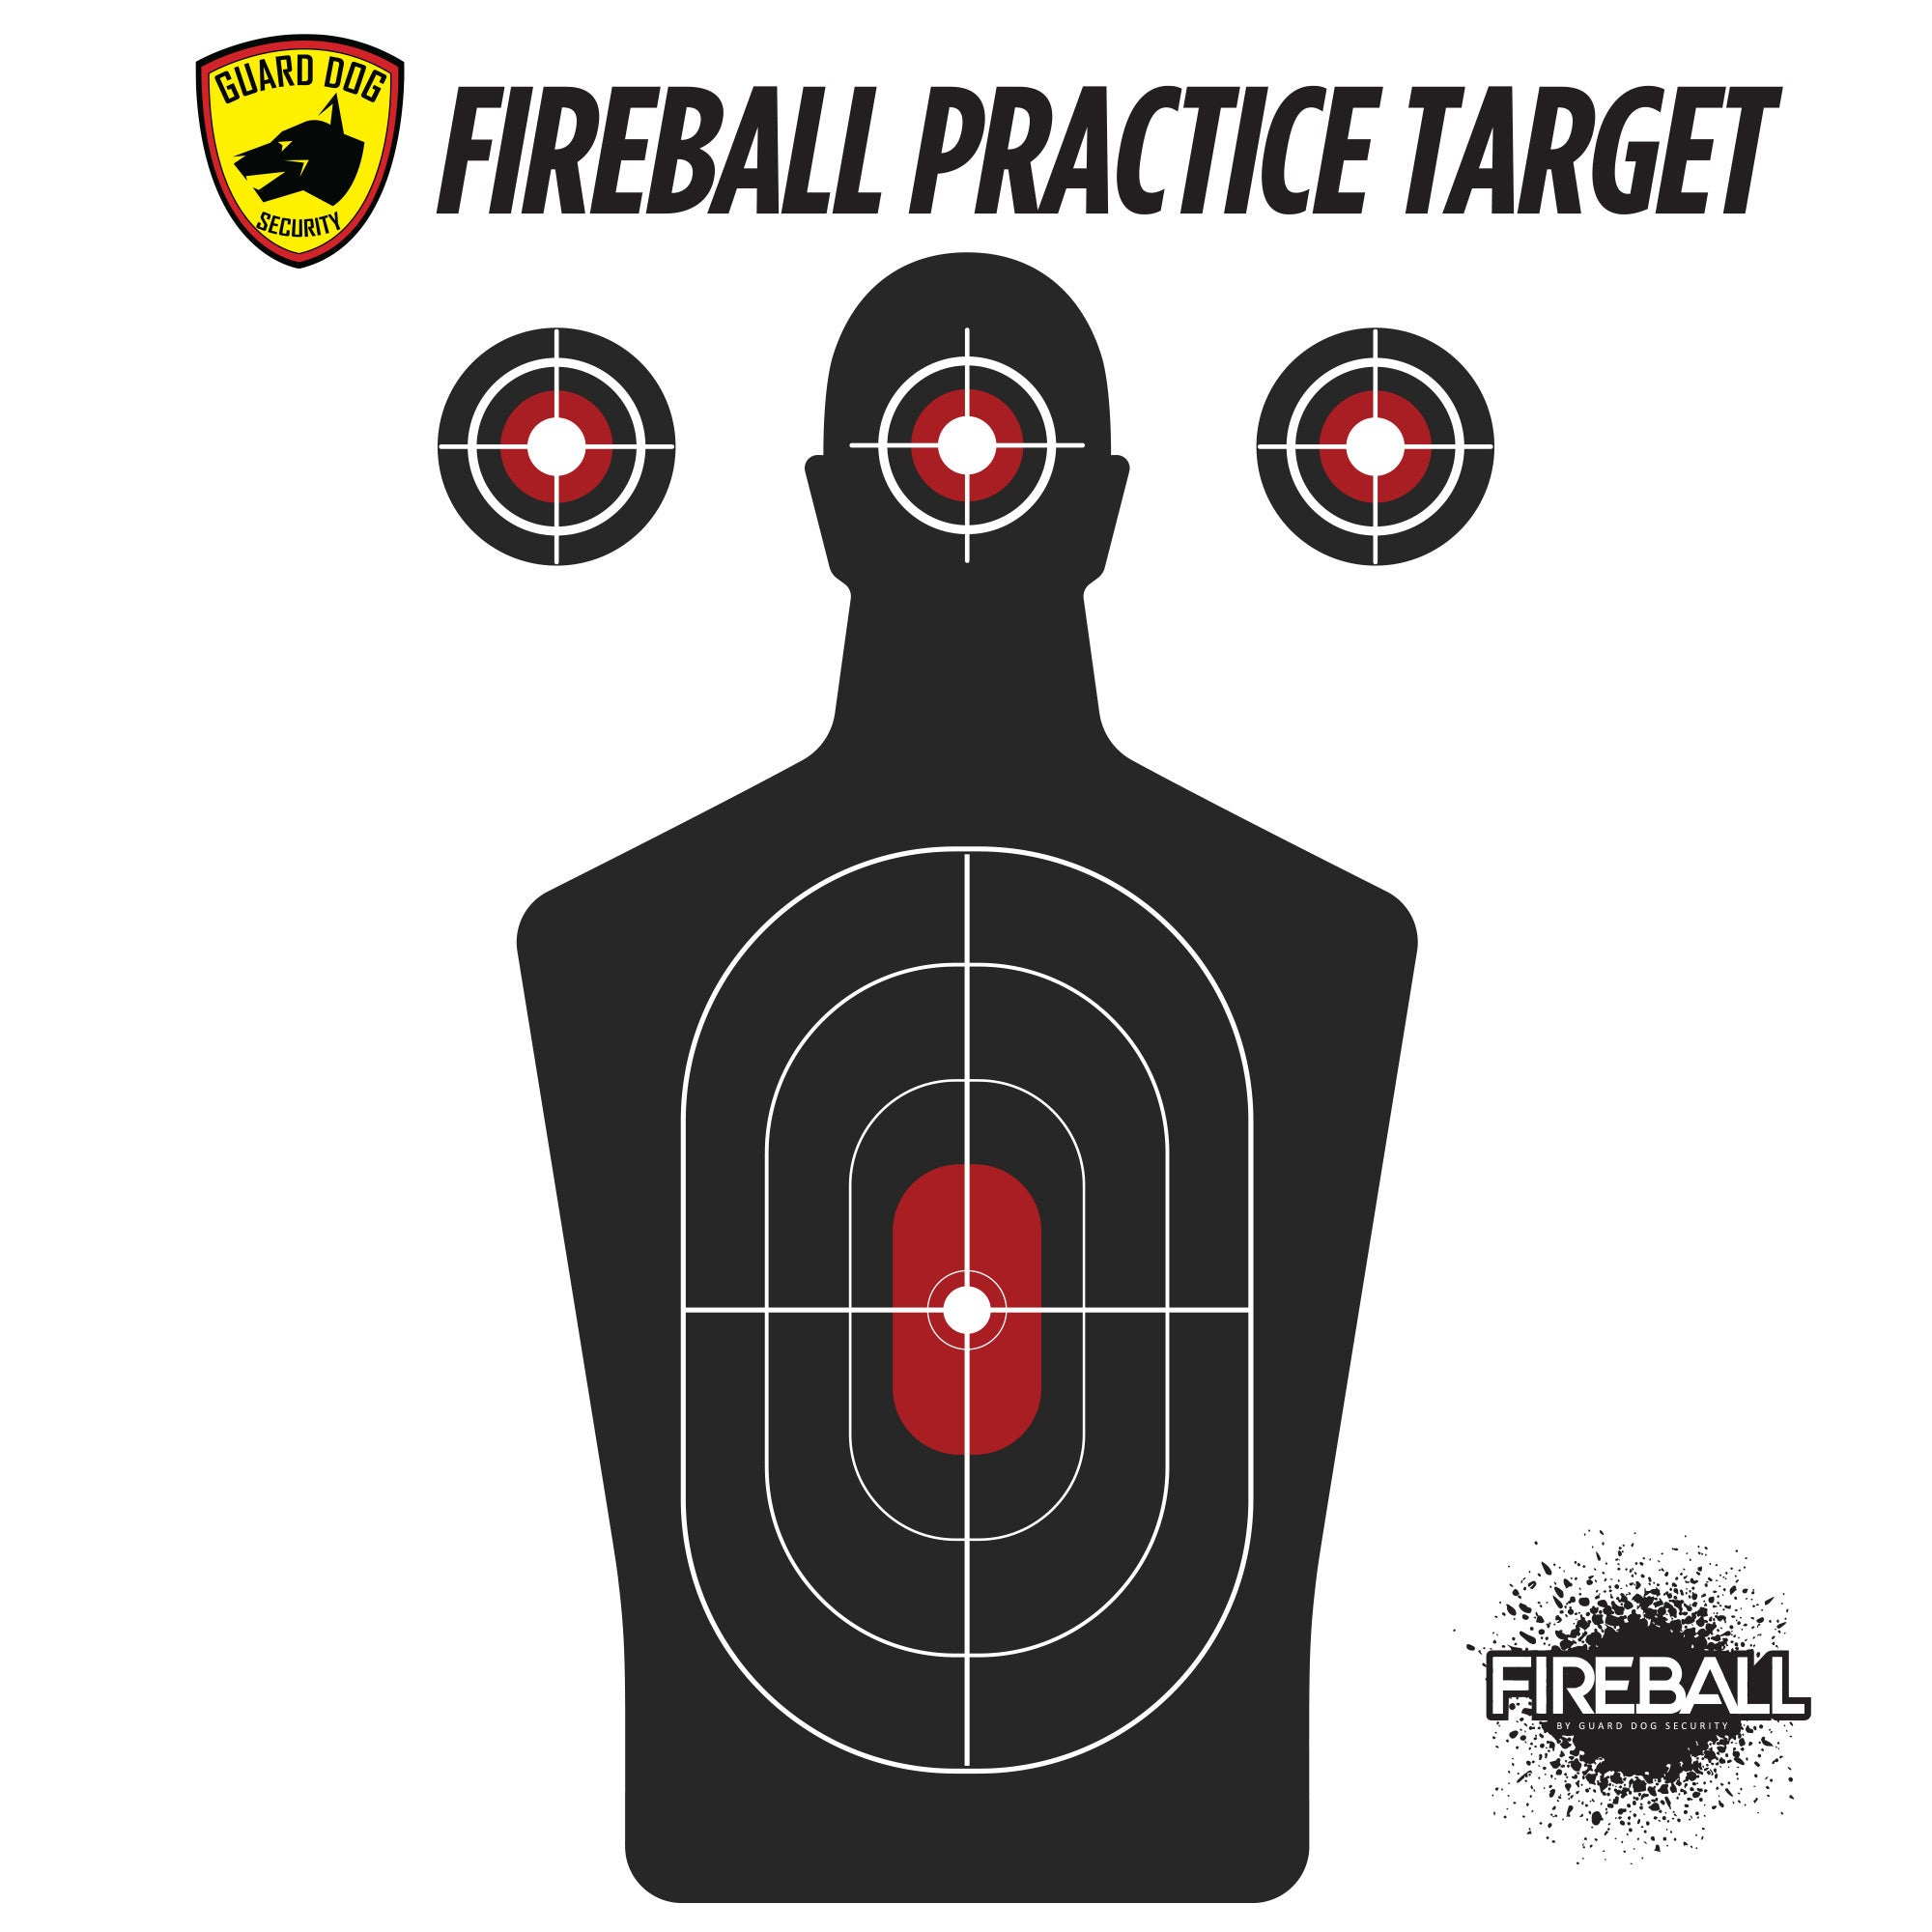 Paper Shooting Targets for The Range, Pistol Practice, 12 x 18 inch Silhouette with Red Bullseye - Made in USA